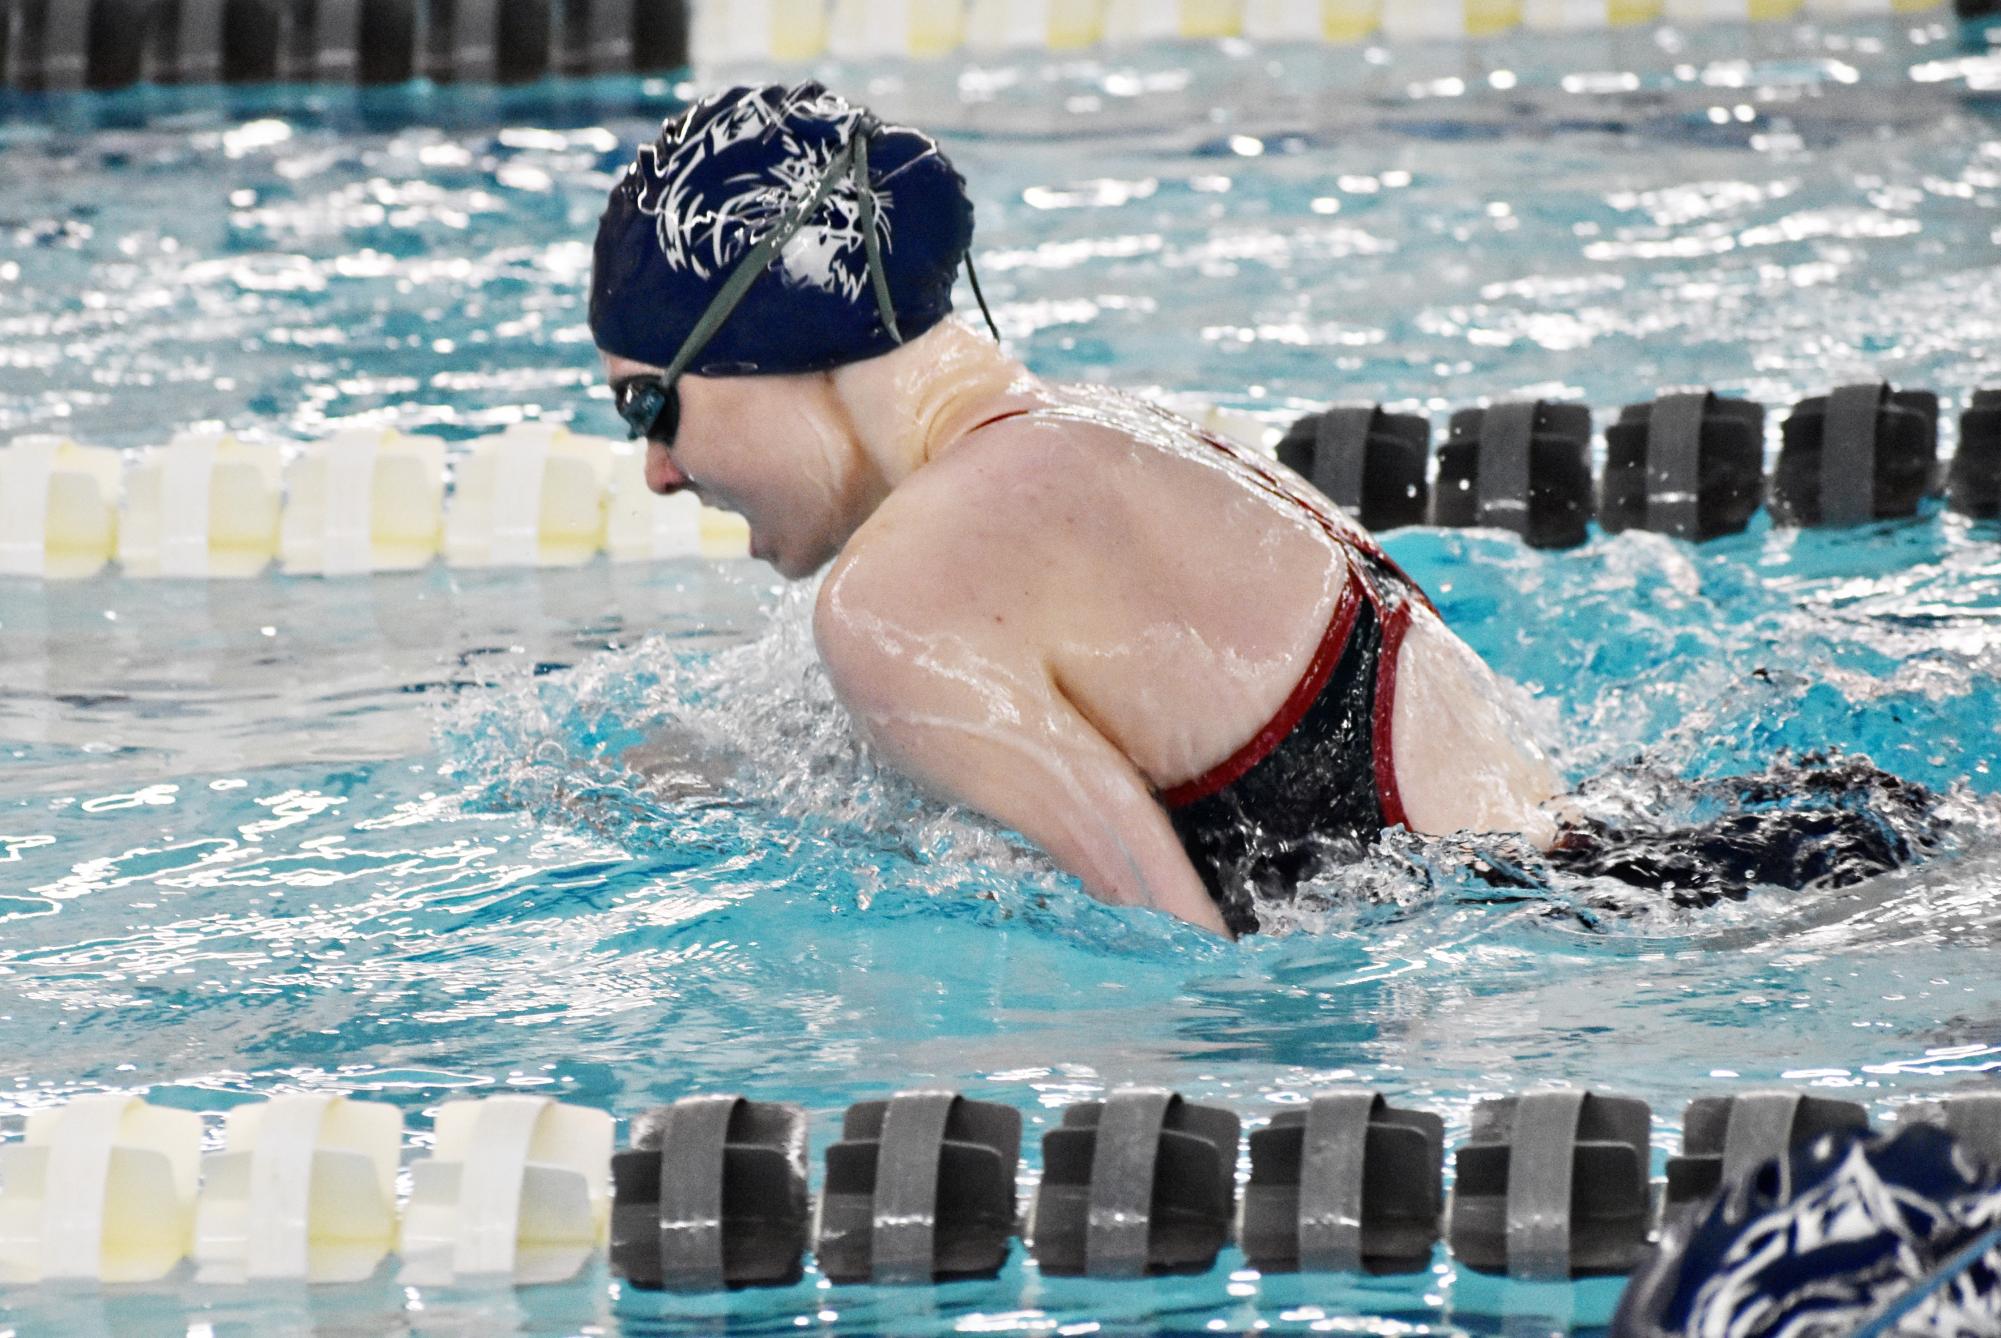 Senior Hollyn Ambre, a student at Batavia High School, works on her breaststroke during practice.